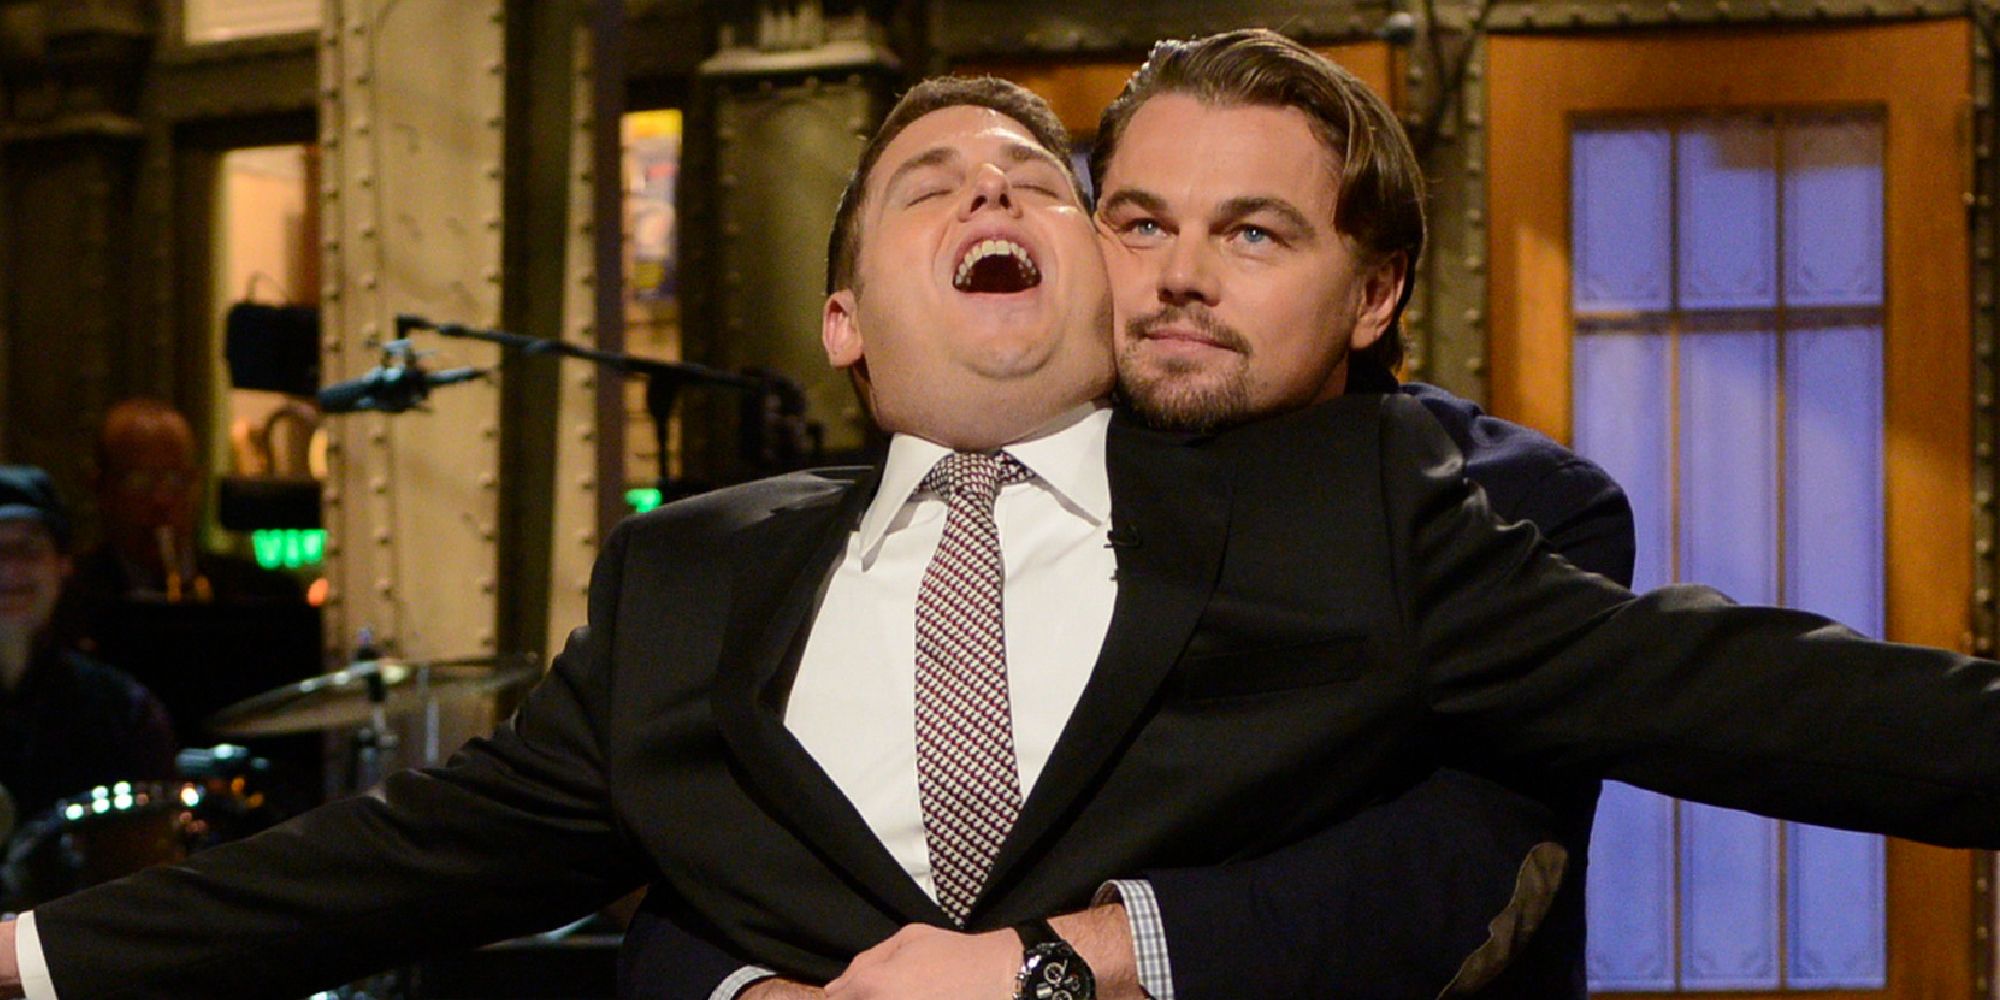 Leonardo DiCaprio re-enacting the Titanic hug with Jonah Hill in an SNL monologue